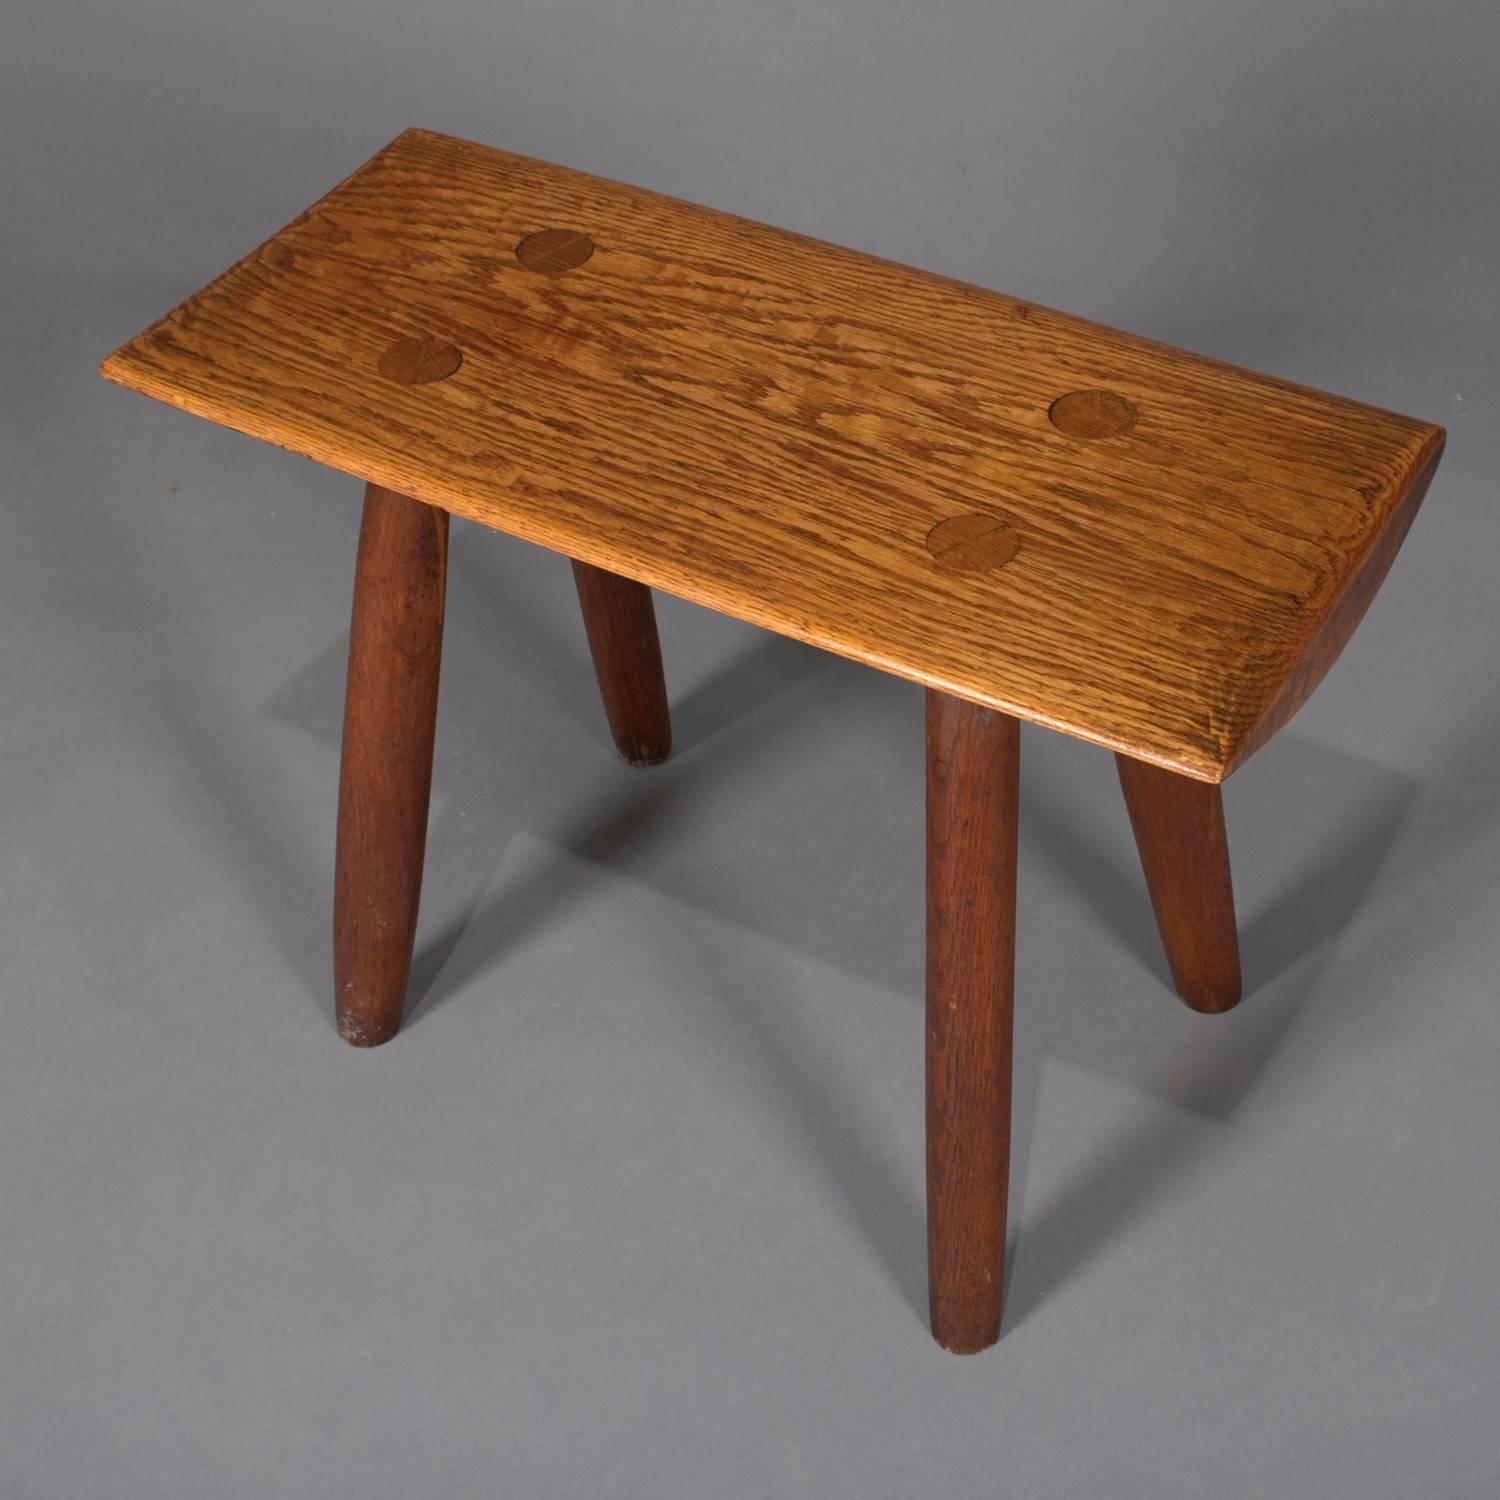 Adirondack Old Hickory School hand-carved bench features slab wood seat with mortise and tenon legs, circa 1940

Measures - 19